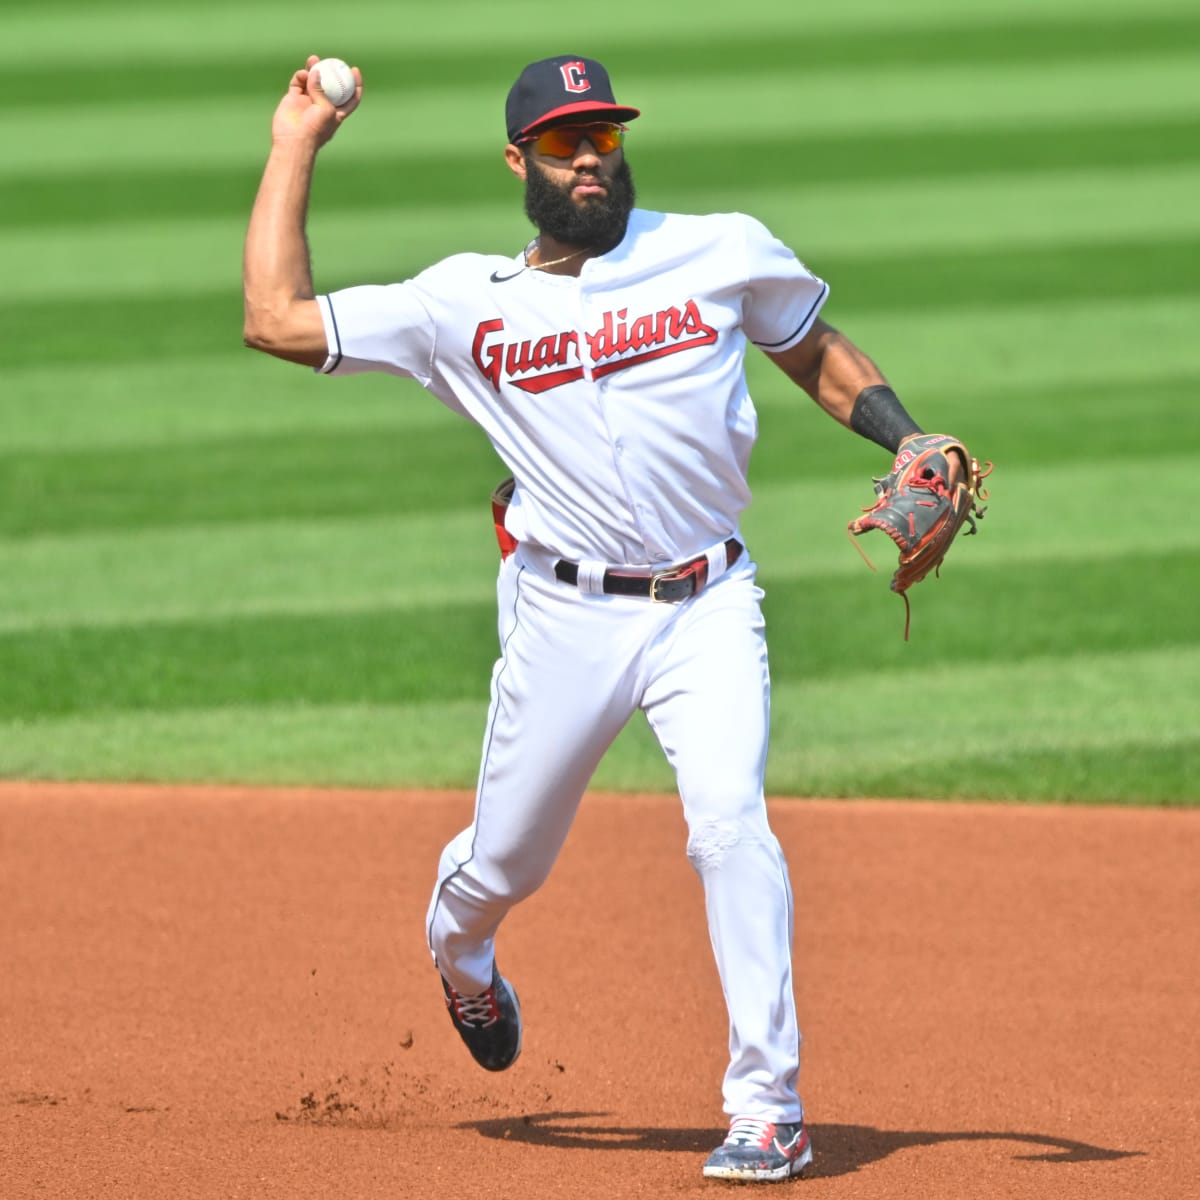 Rosario becomes FA after going unclaimed, non-tendered by Twins